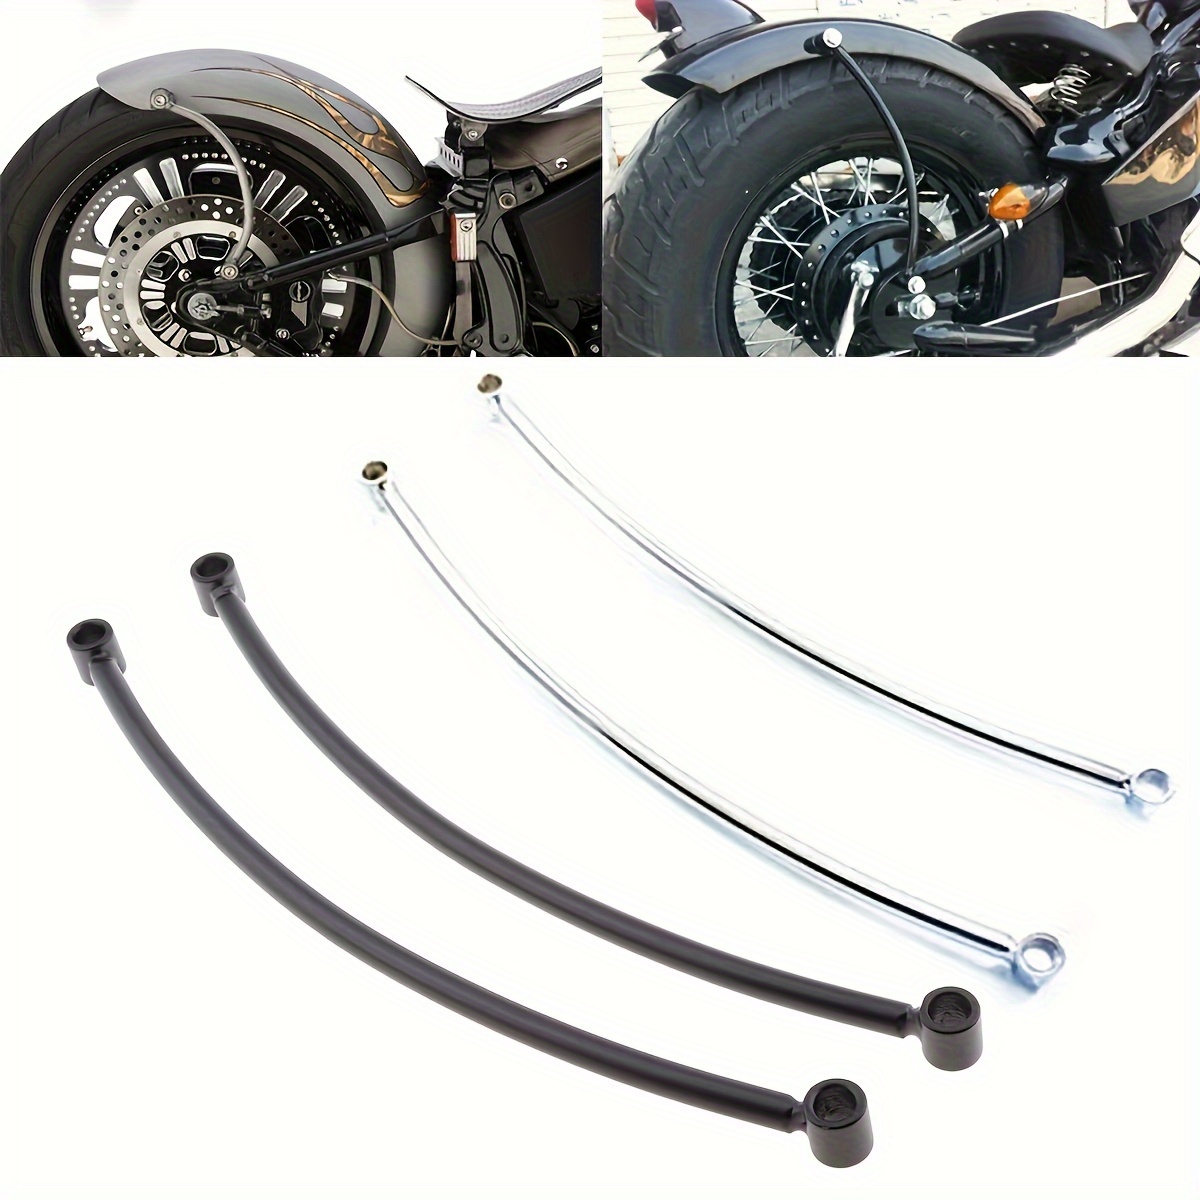 Rear tire License plate Holder Balck or Chrome for Motorcycle Harley  Choppers Bobbers